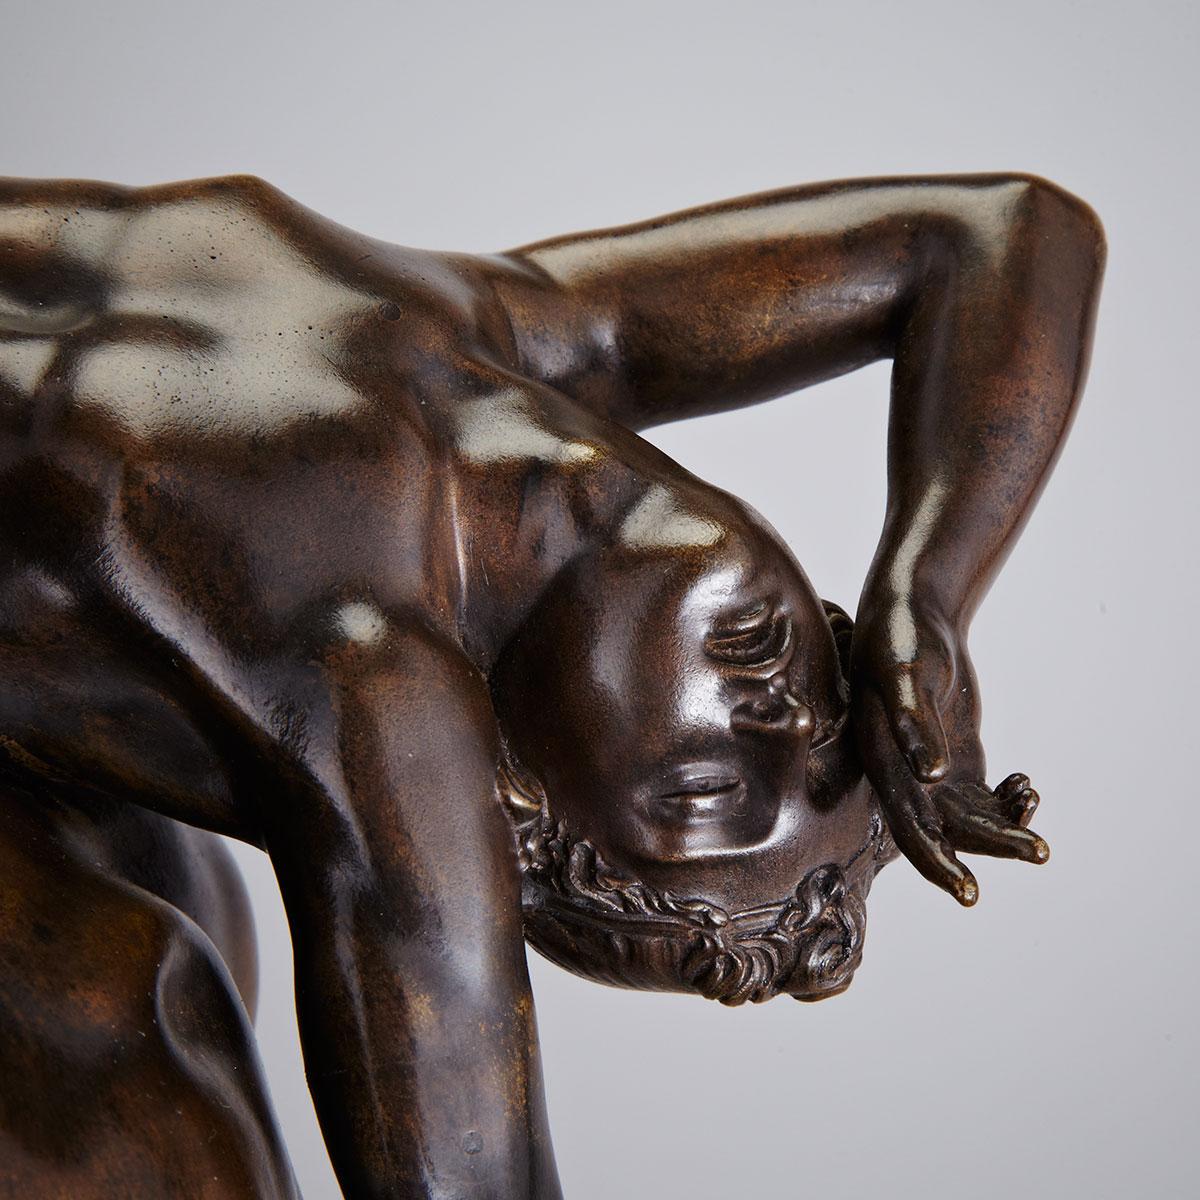 Italian School Patinated Bronze Mythological Group, early - mid 20th century